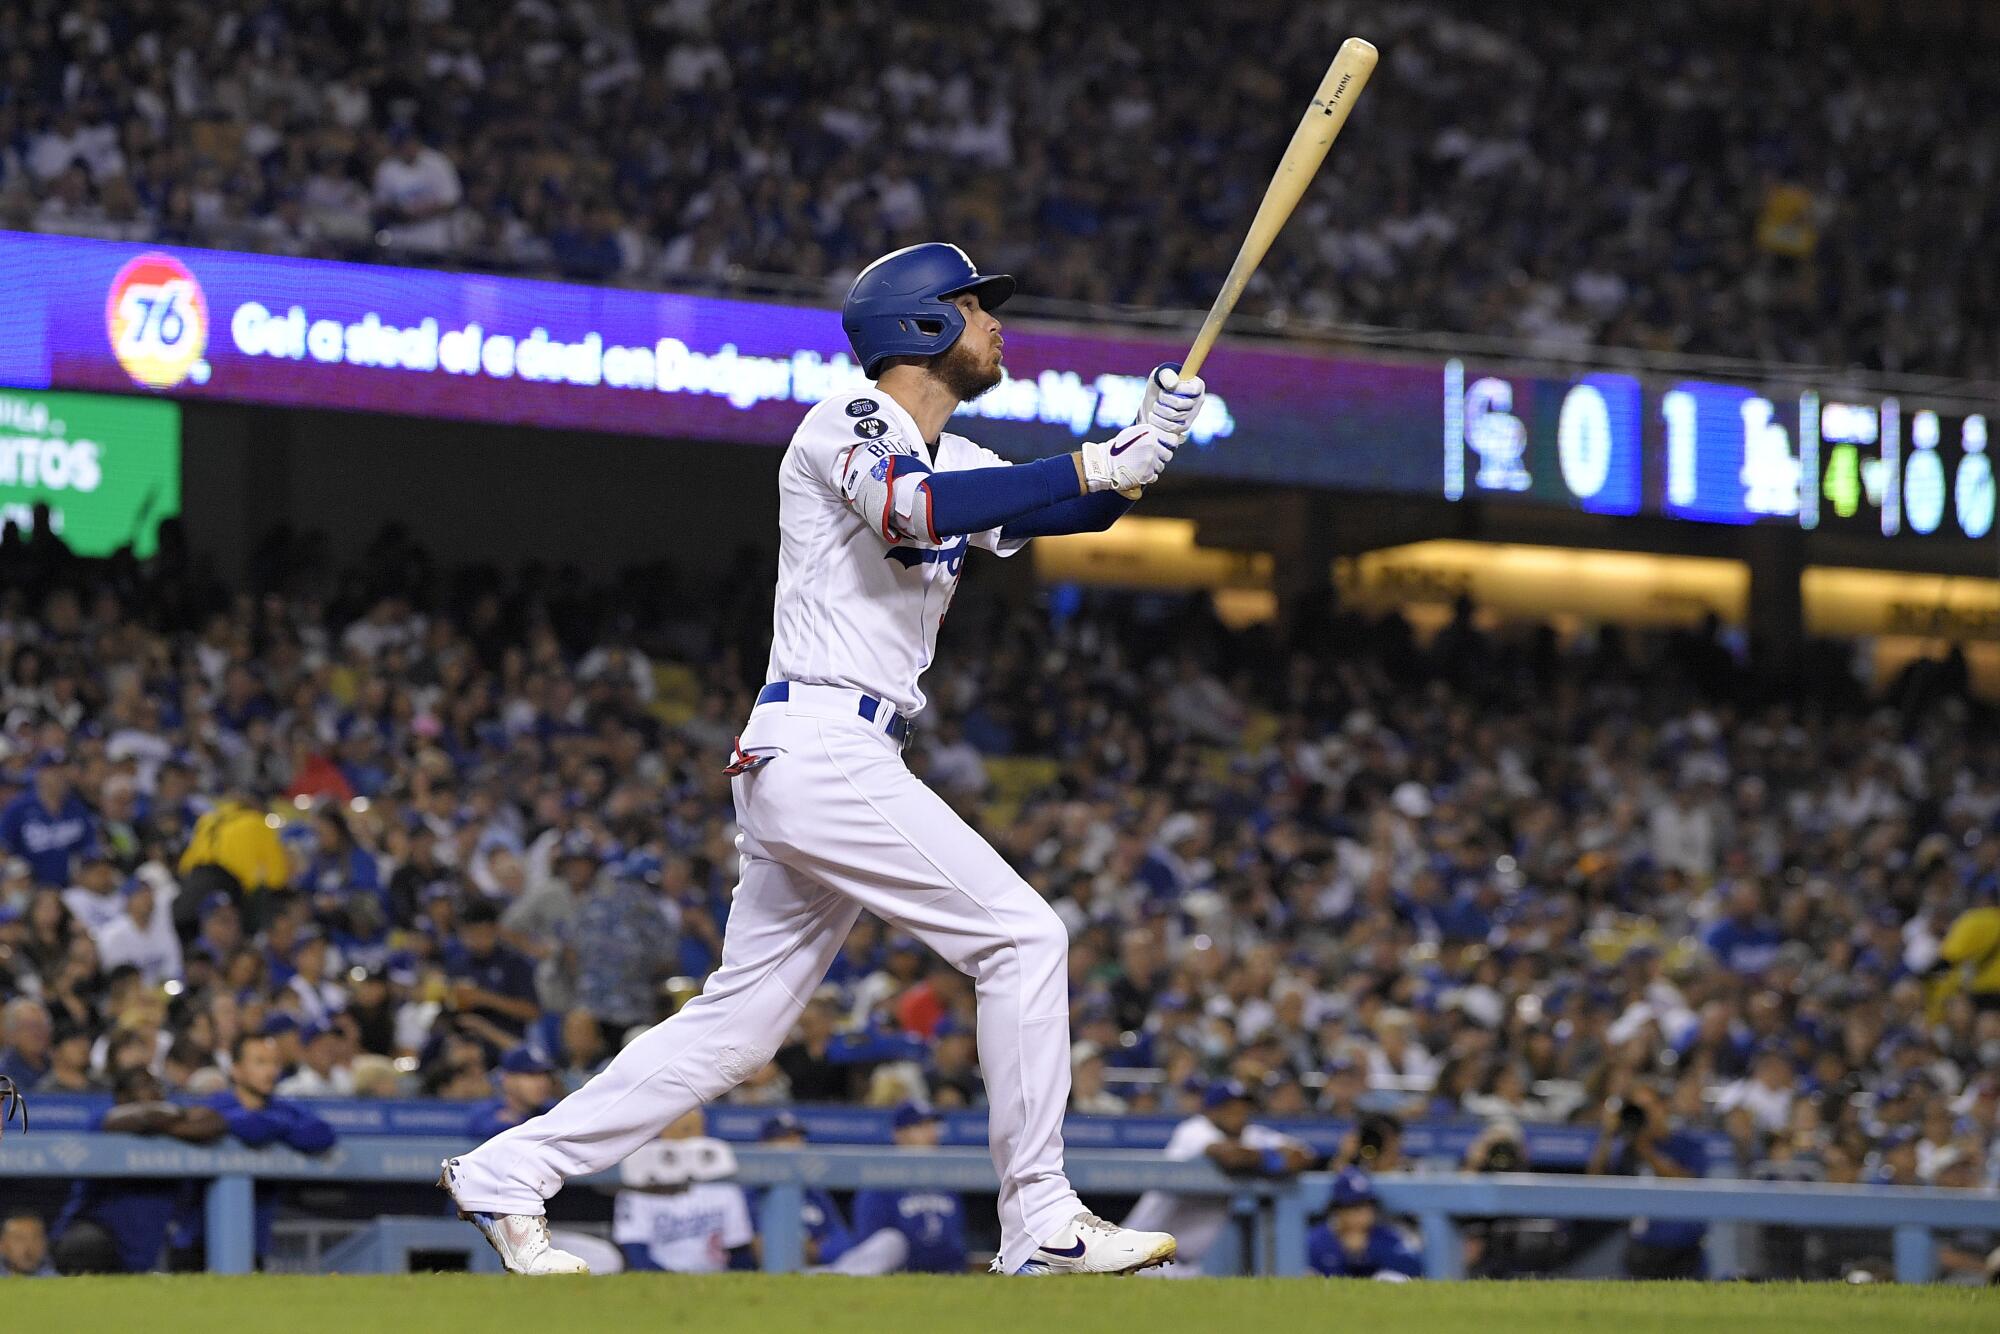 Cody Bellinger hits a three-run home run for the Dodgers against the Colorado Rockies on Sept. 30, 2022.